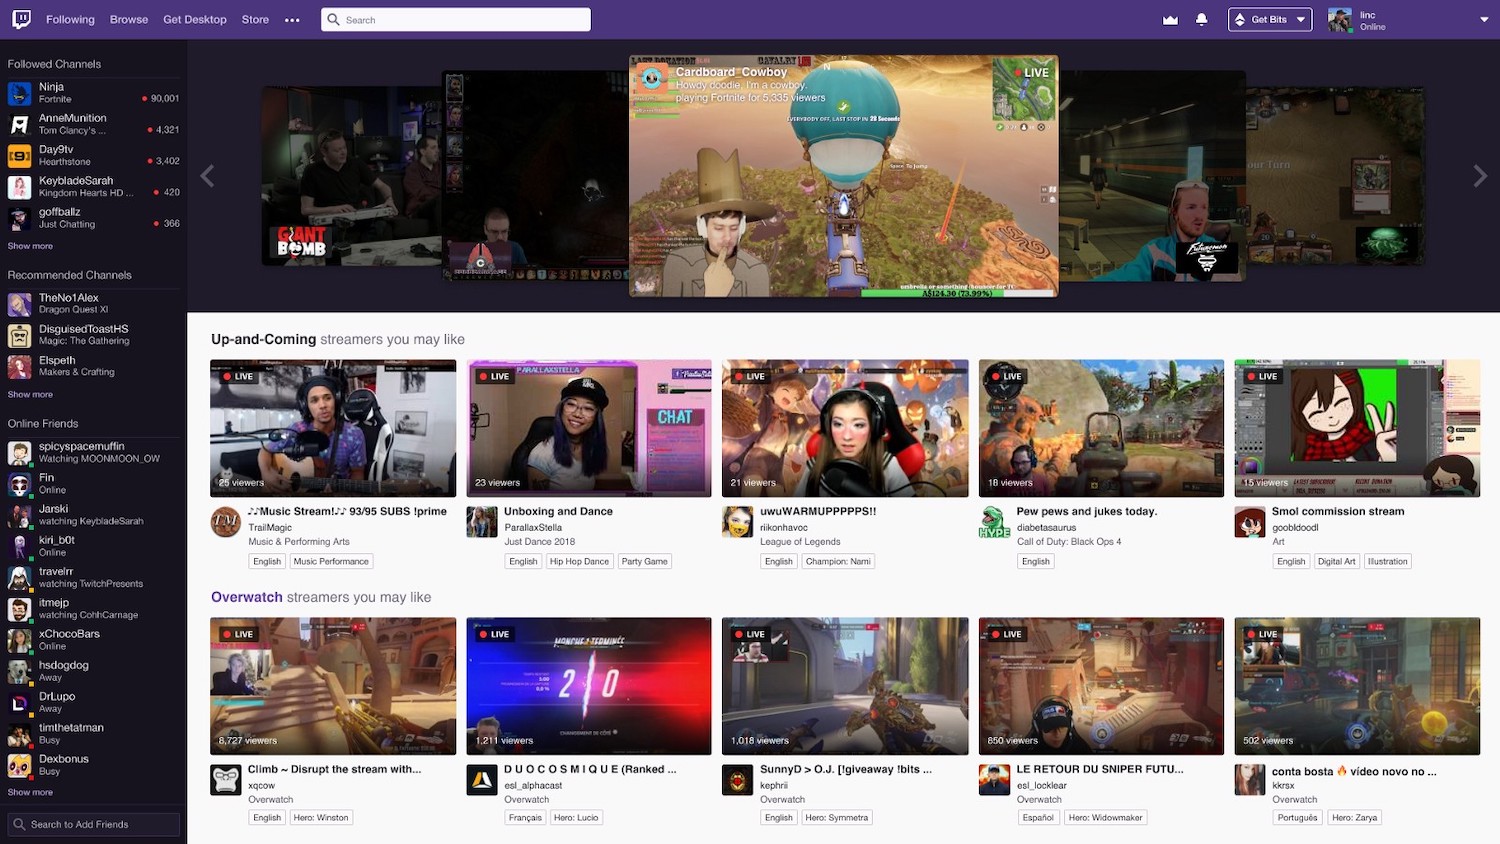 A "mess is more" design ethic drove Twitch's brand campaign.